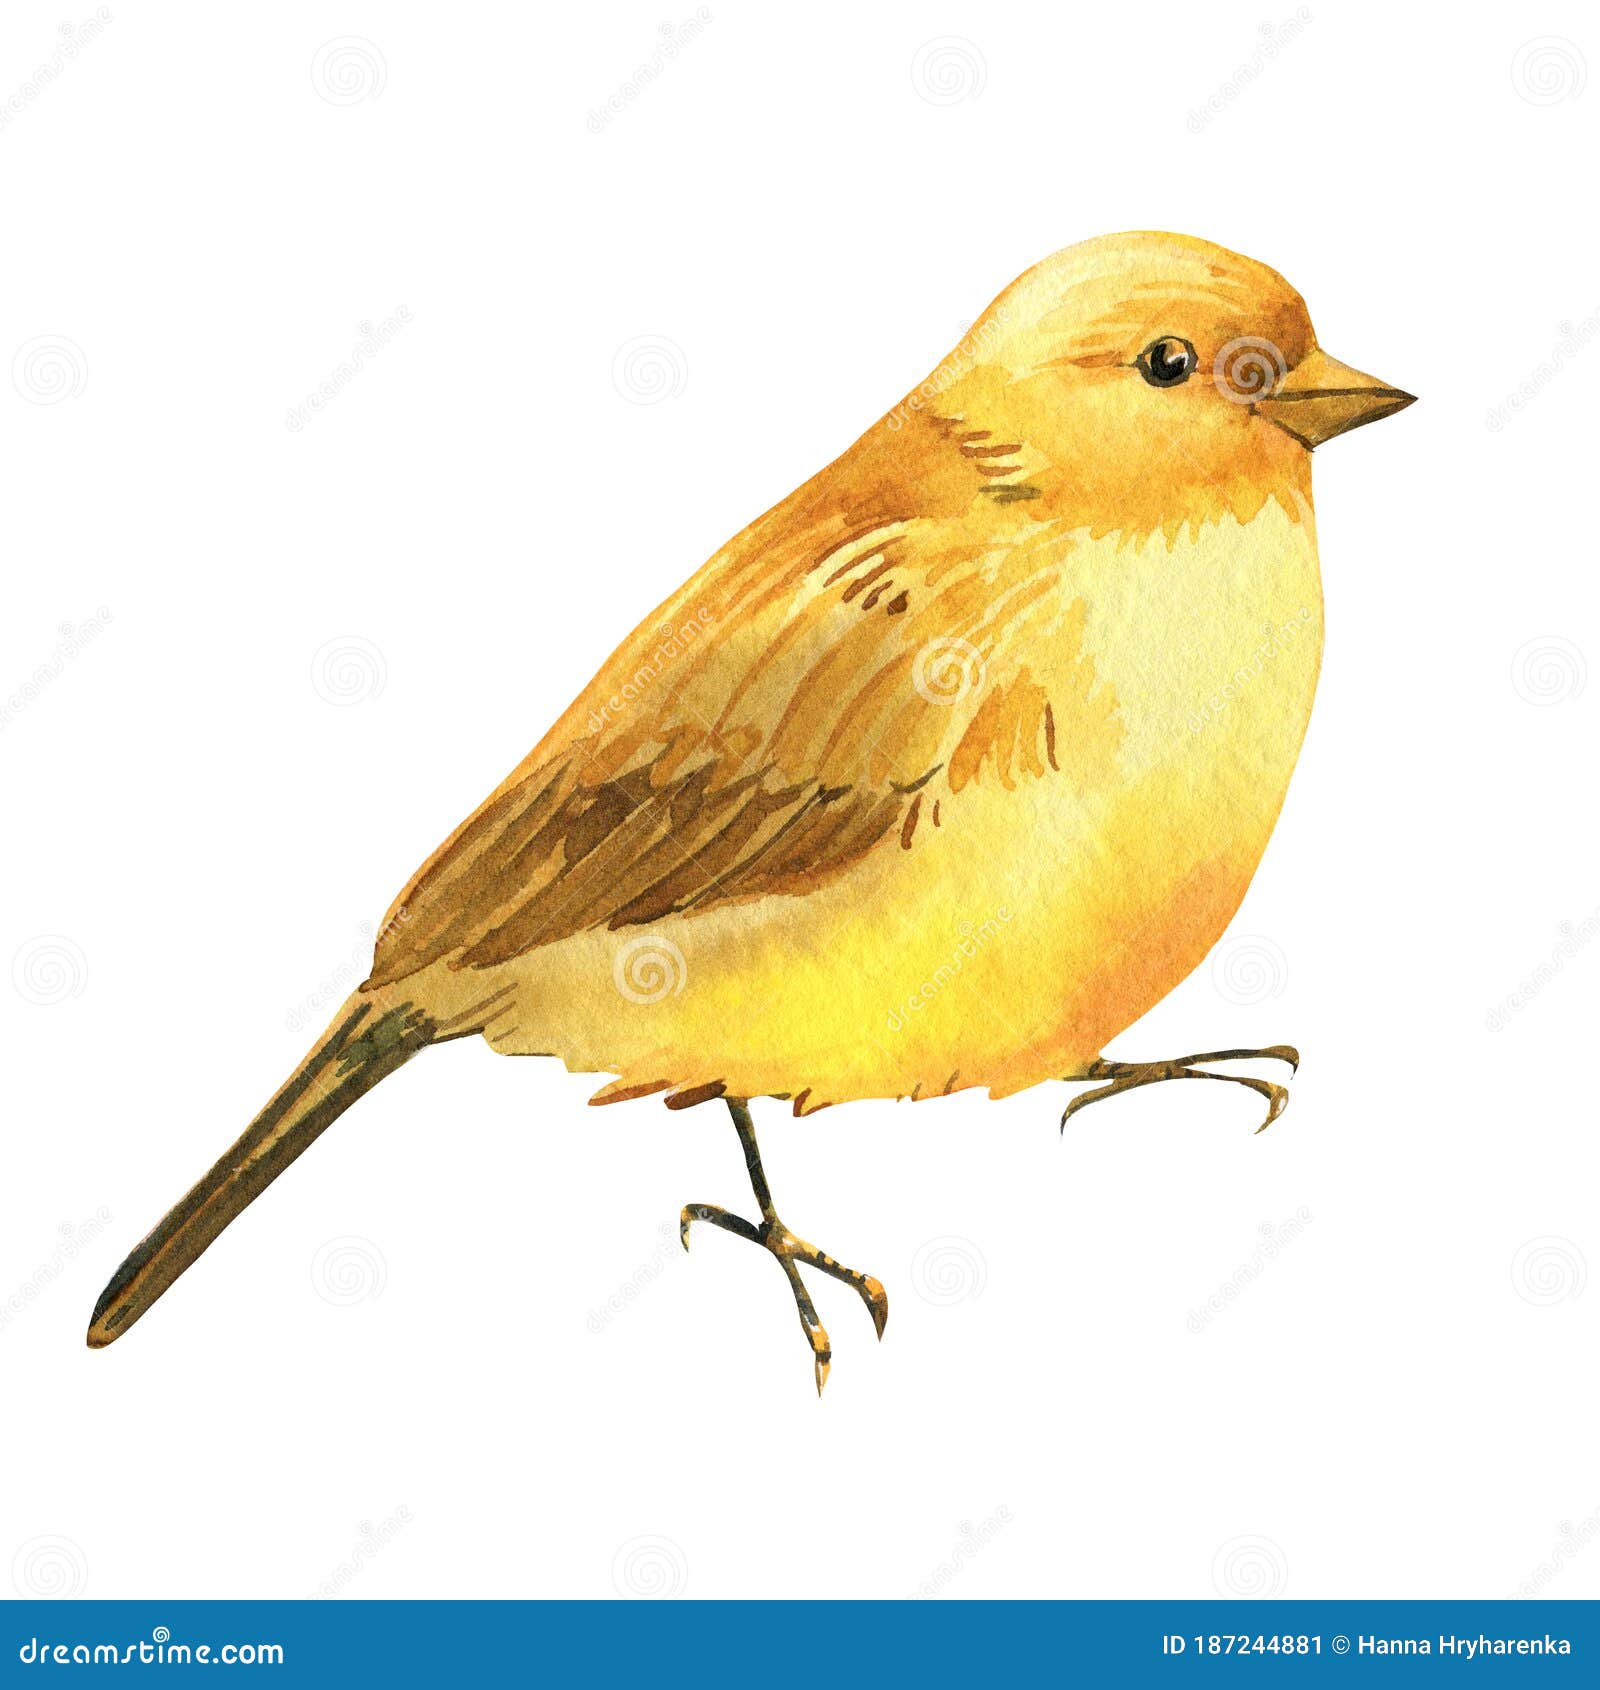 How to Draw a Canary with Step by Step Tutorial to Drawing Canaries  How  to Draw Step by Step Drawing Tutorials